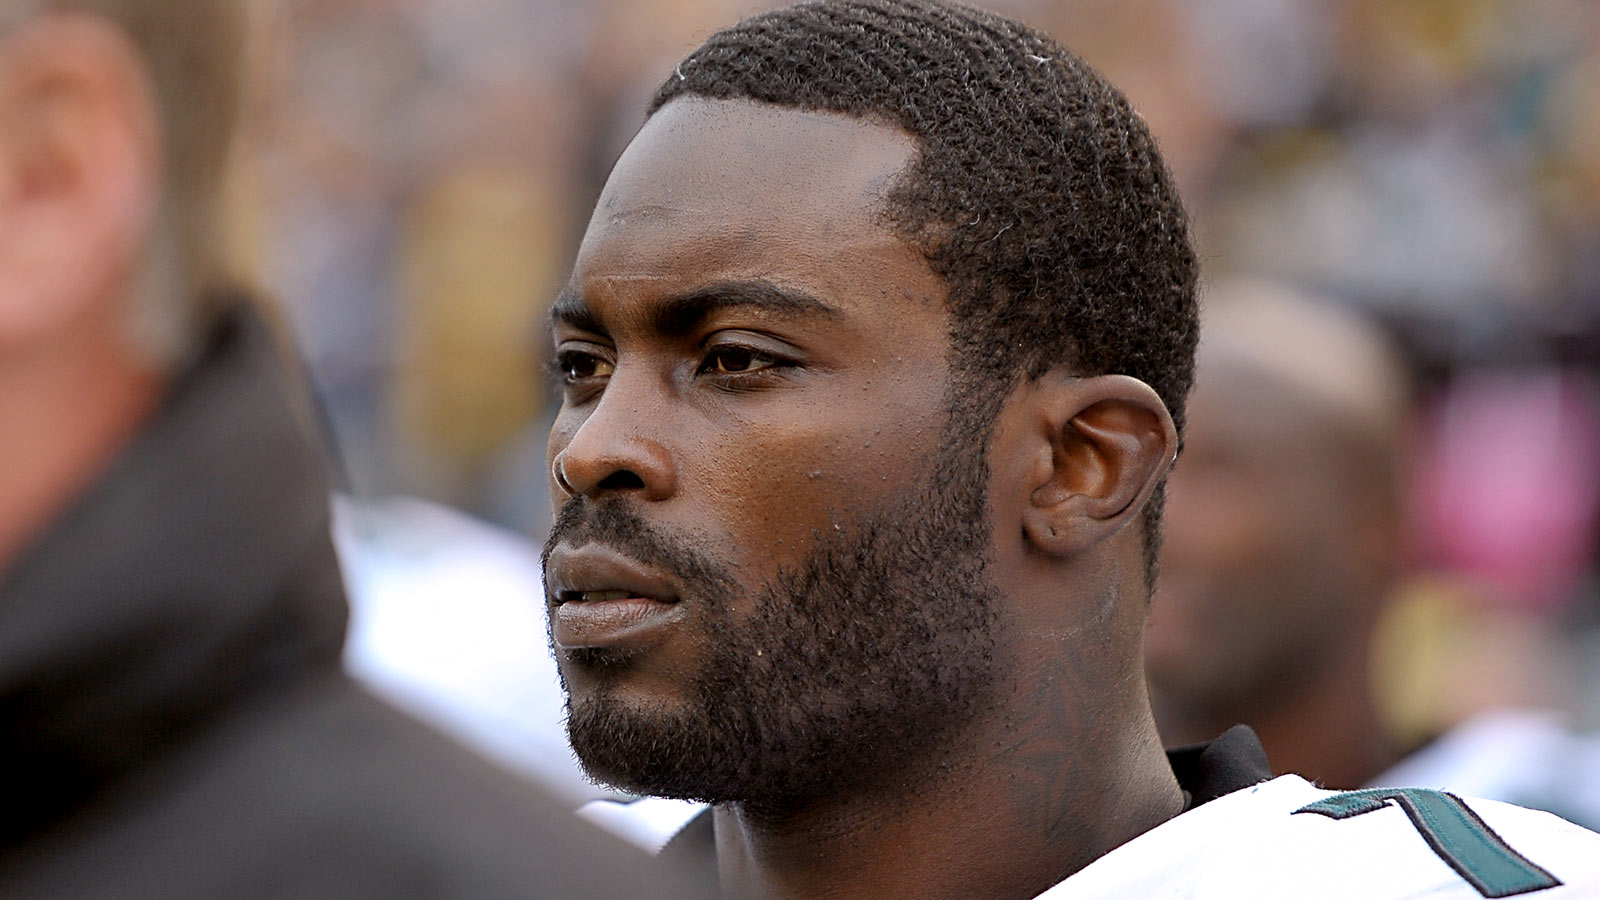 Petition wants Michael Vick banned from Jets training camp site